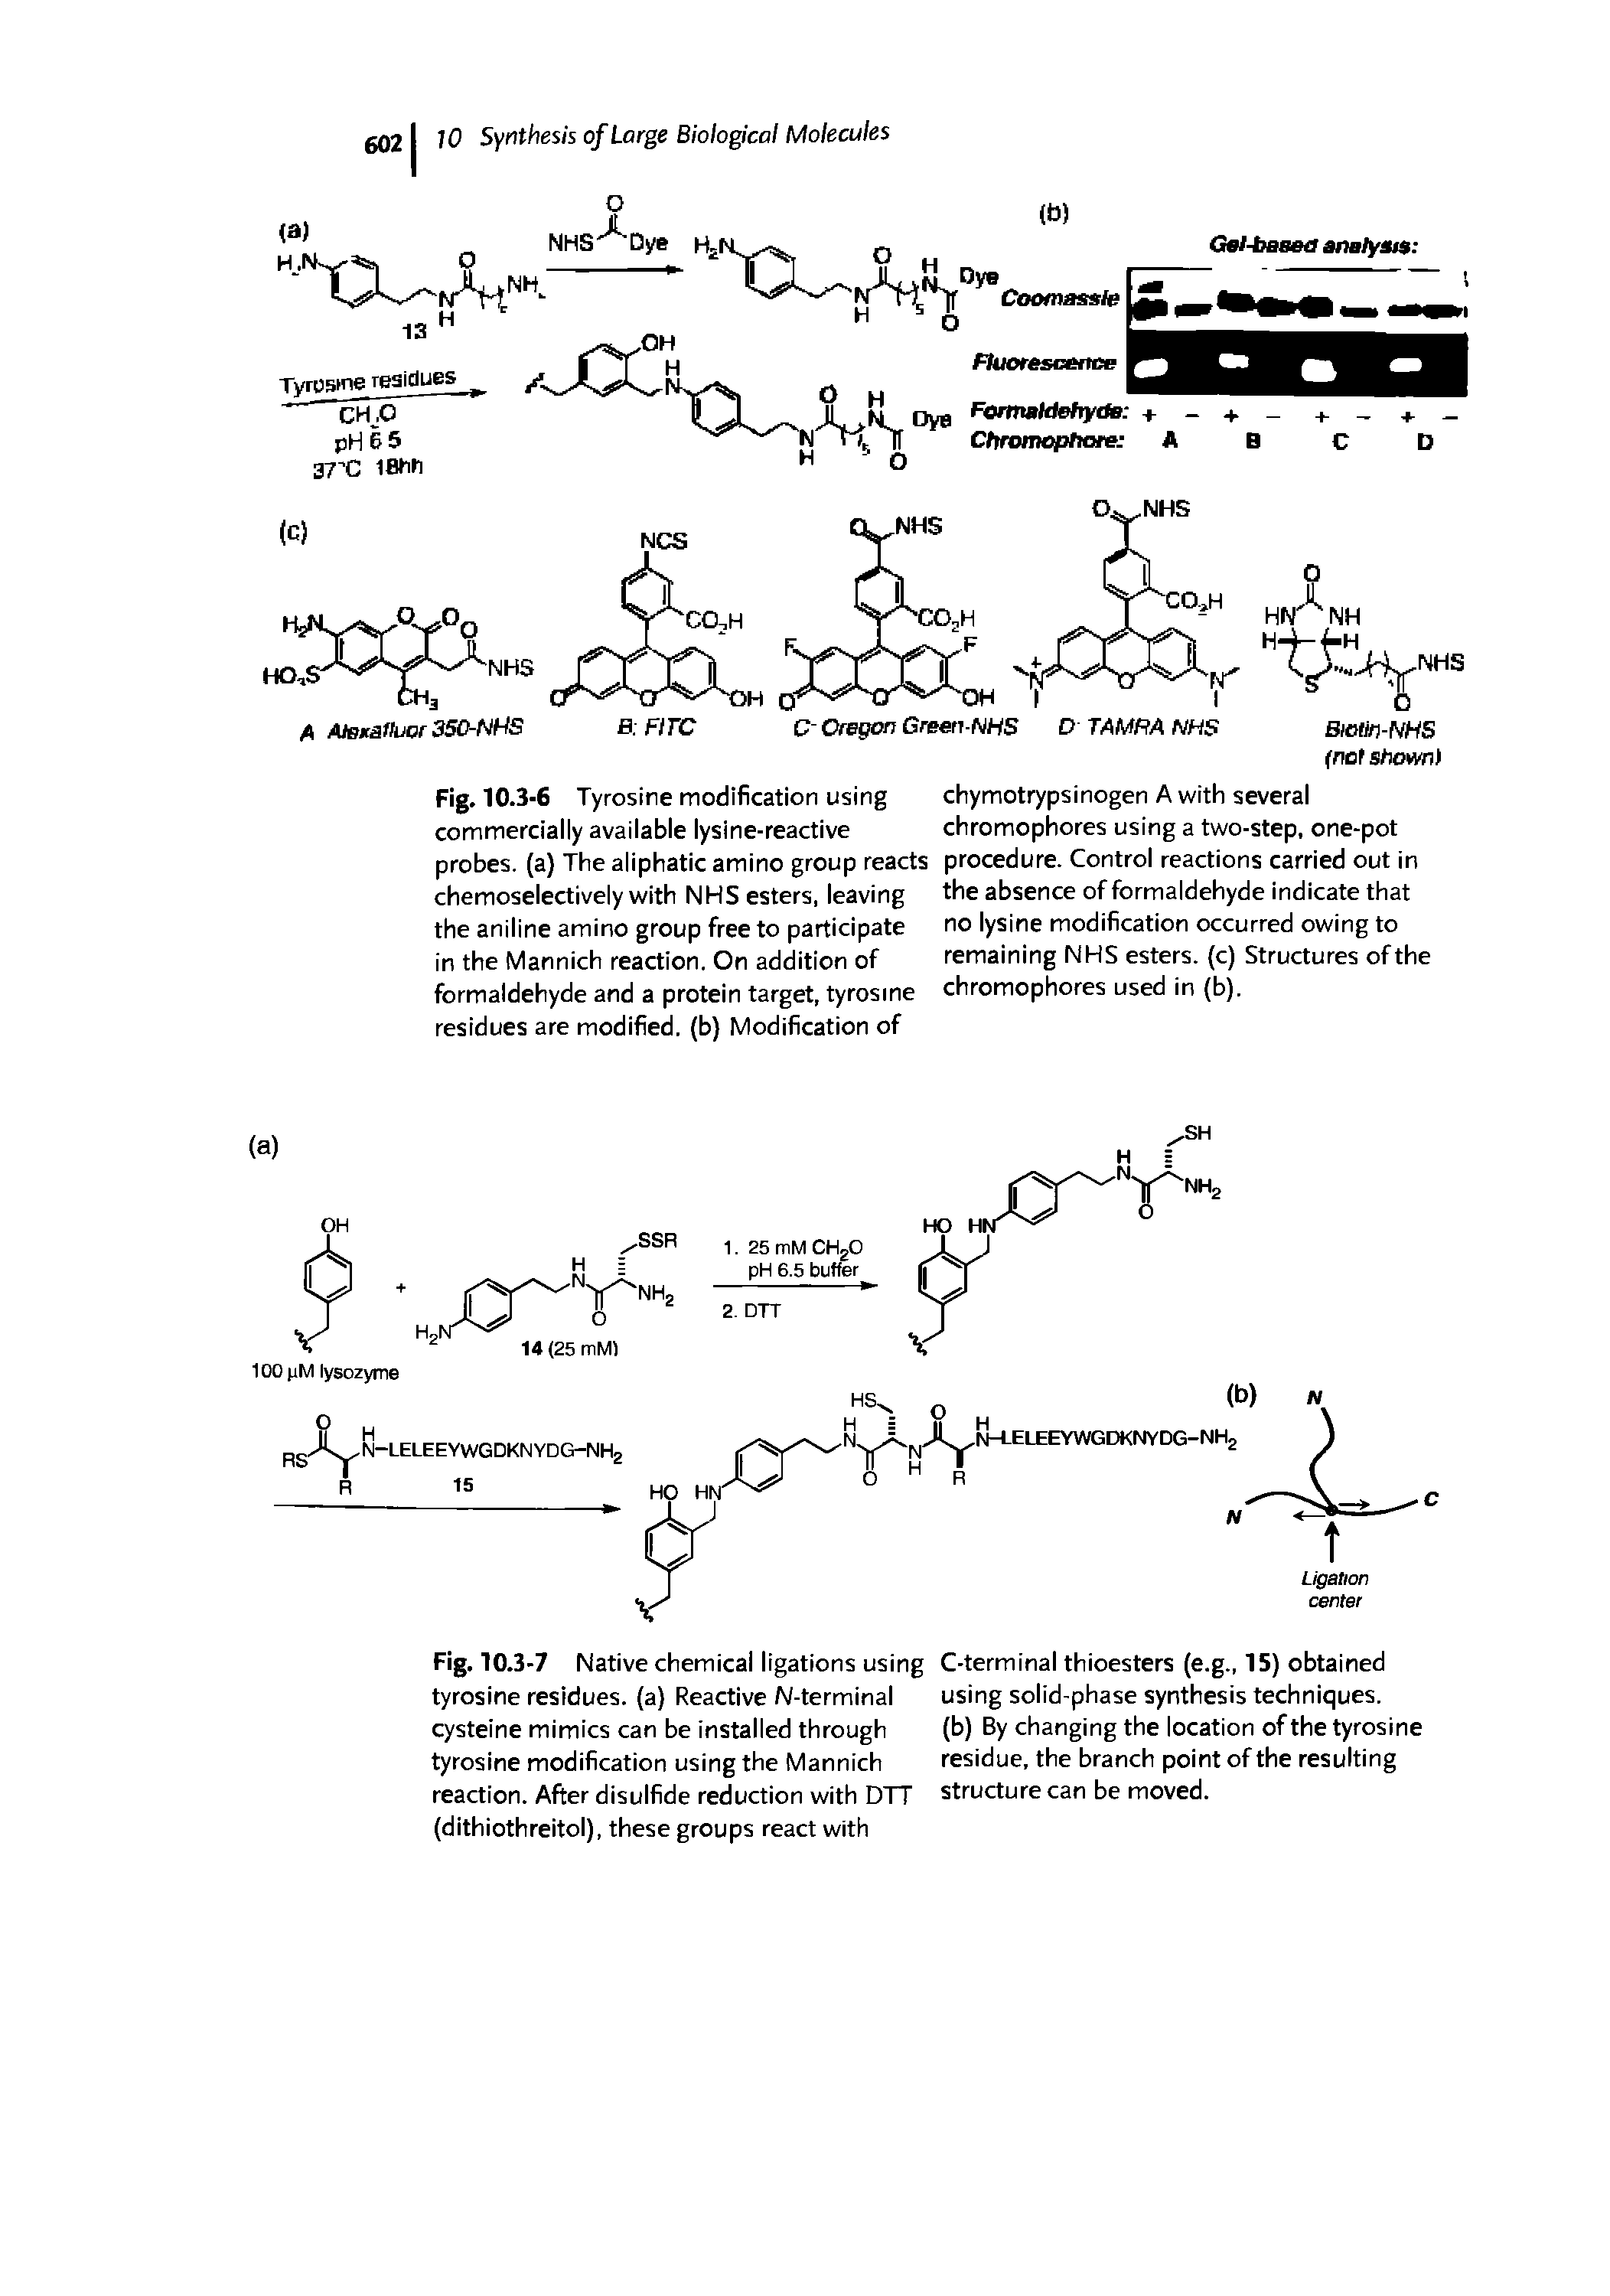 Fig. 10.3-6 Tyrosine modification using commercially available lysine-reactive probes, (a) The aliphatic amino group reacts chemoselectively with NHS esters, leaving the aniline amino group free to participate in the Mannich reaction. On addition of formaldehyde and a protein target, tyrosine residues are modified, (b) Modification of...